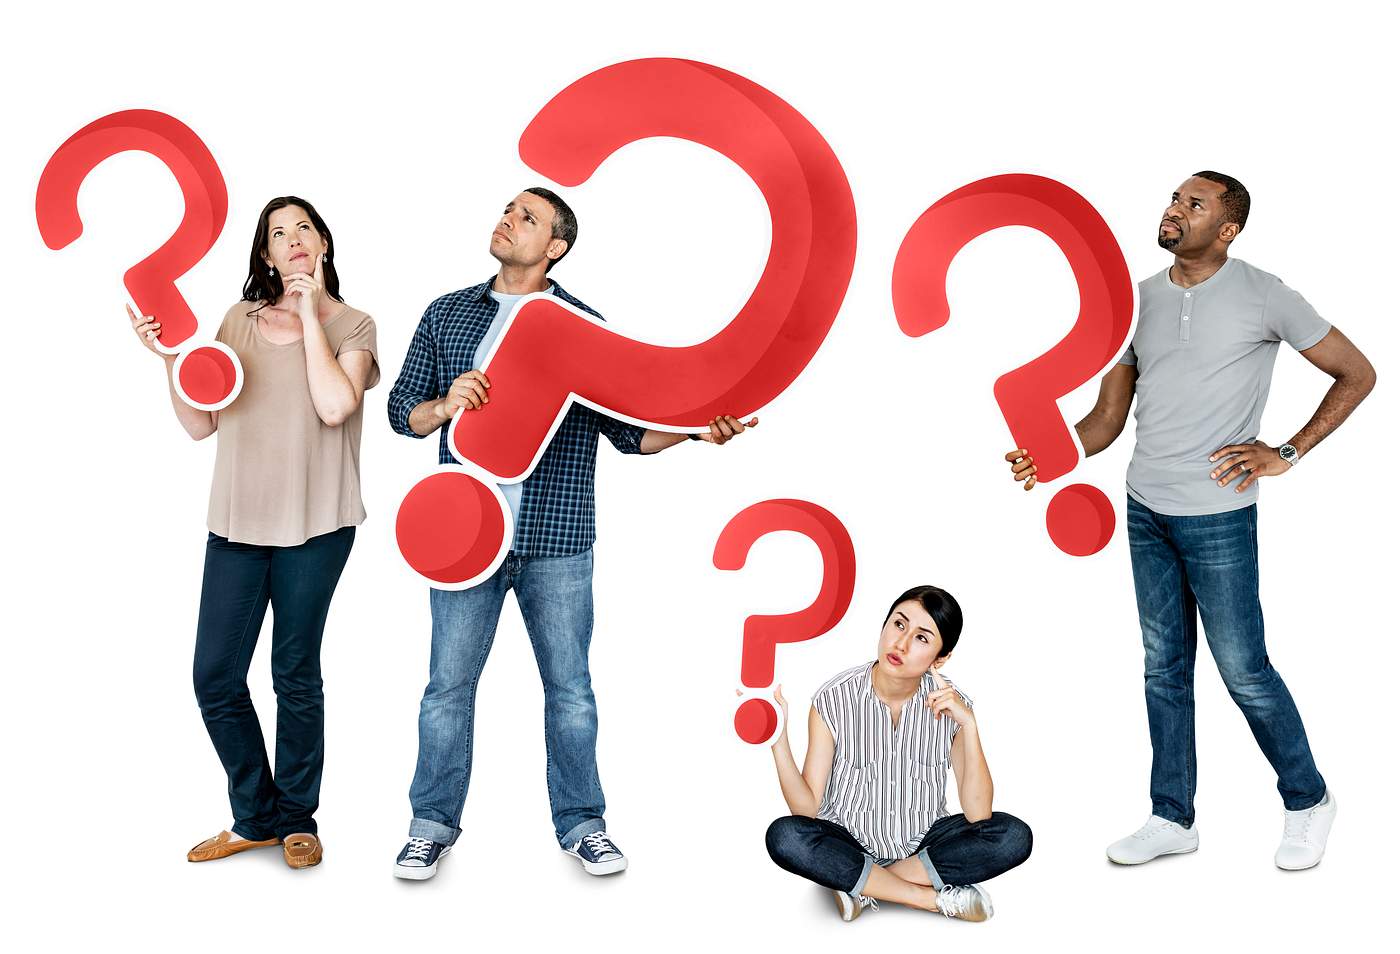 Download Diverse people holding question mark icons | Royalty free psd mockup - 469416